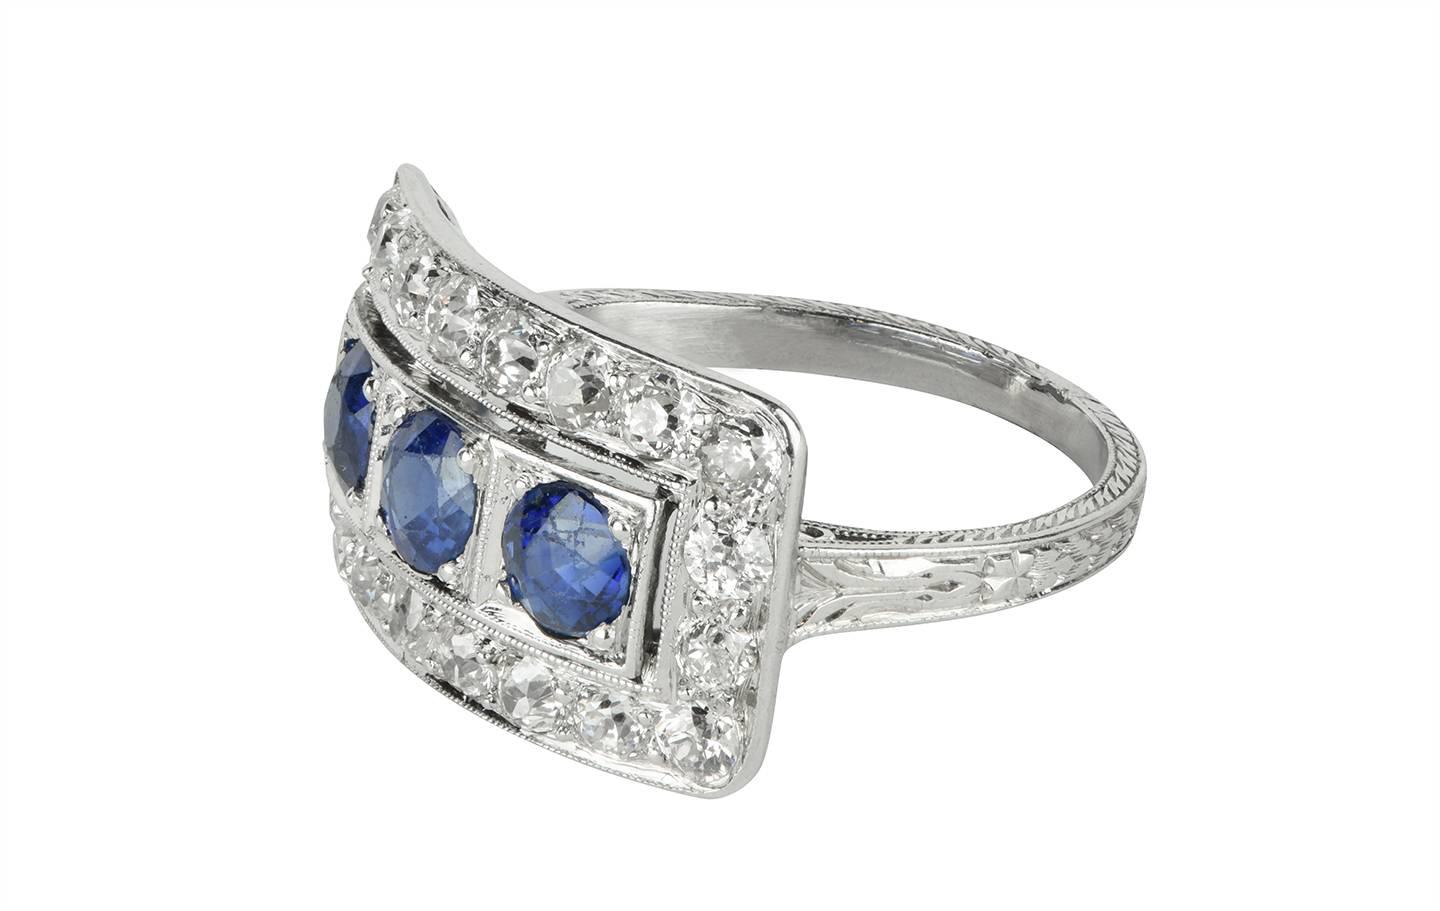 A beautiful sapphire and diamond platinum ring from the Art Deco period.  There are three old round cut sapphires set in the center, with a single row of old European cut diamonds surrounding.  the sapphires have a total weight of 1.00cts, and the